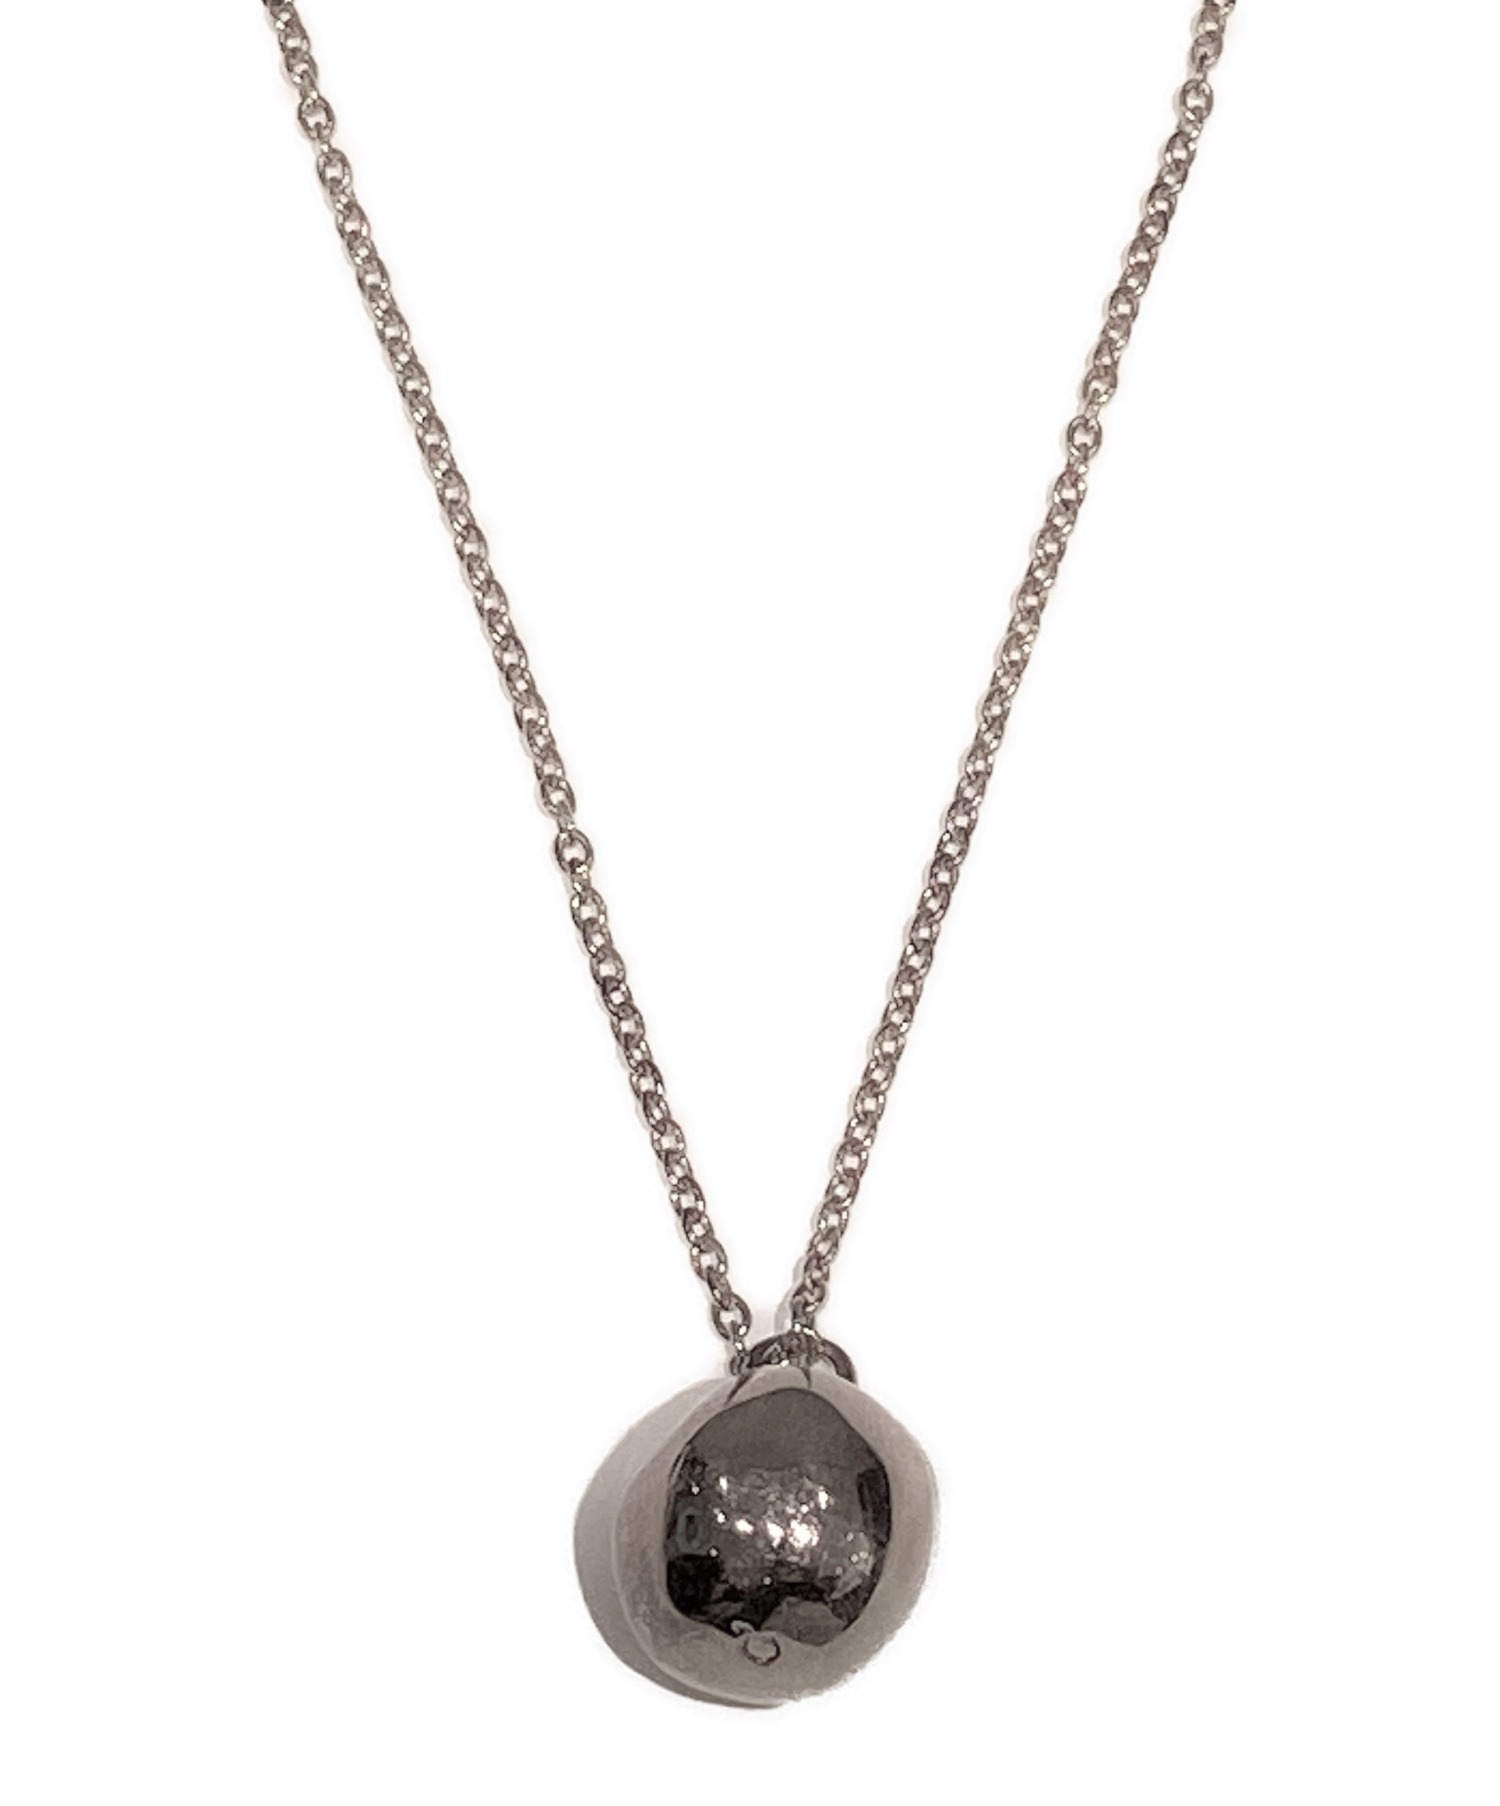 wonky ball necklace